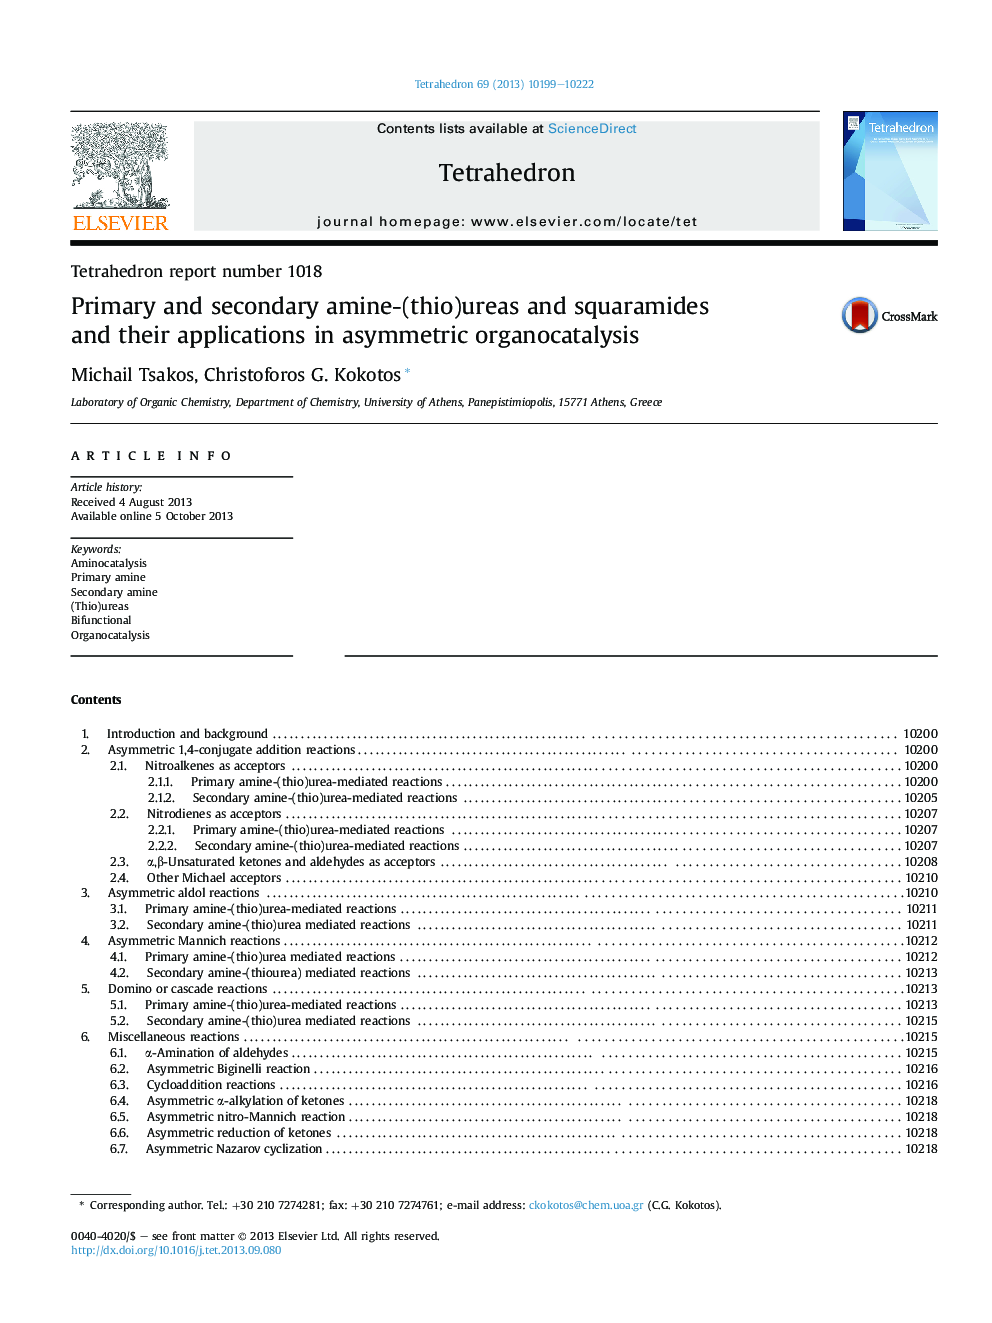 Tetrahedron report number 1018Primary and secondary amine-(thio)ureas and squaramides andÂ their applications in asymmetric organocatalysis